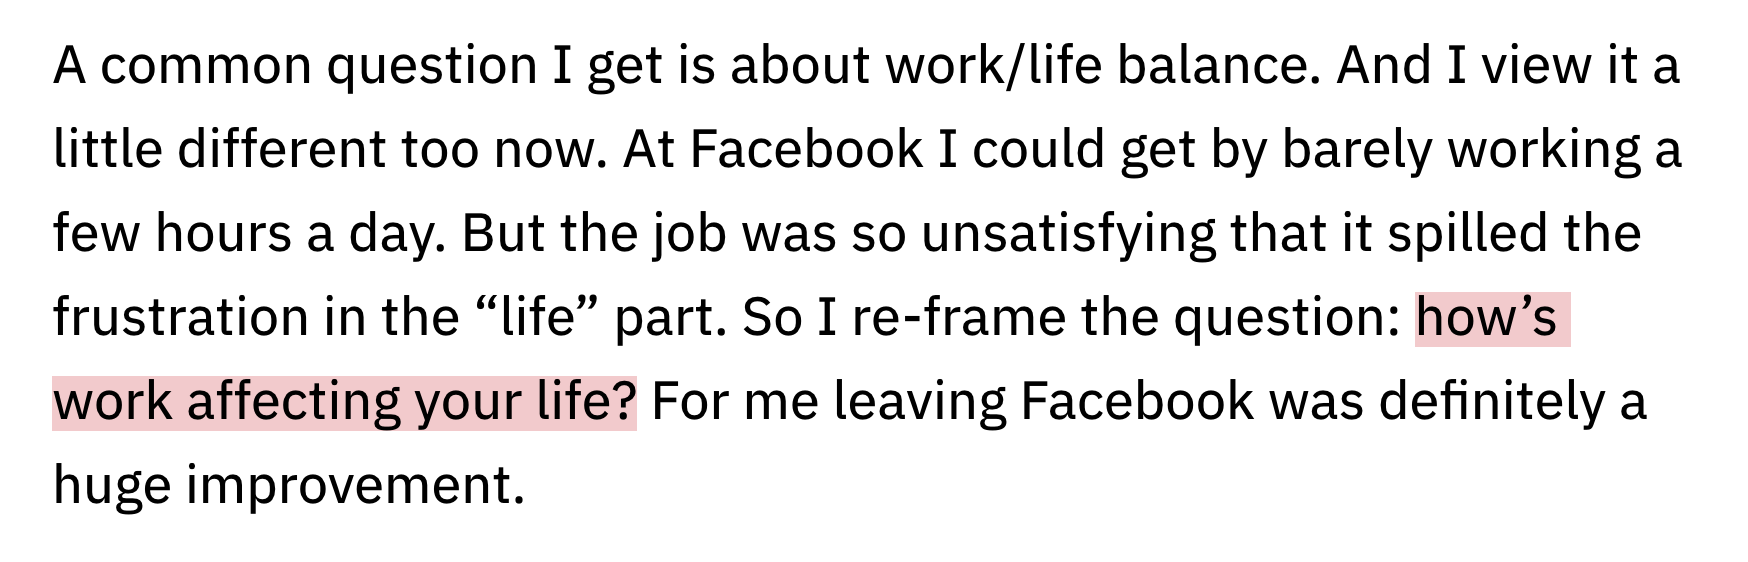 A common question I get is about work/life balance. And I view it a little different too now. At Facebook I could get by barely working a few hours a day. But the job was so unsatisfying that it spilled the frustration in the “life” part. So I re-frame the question: how’s work affecting your life? For me leaving Facebook was definitely a huge improvement.